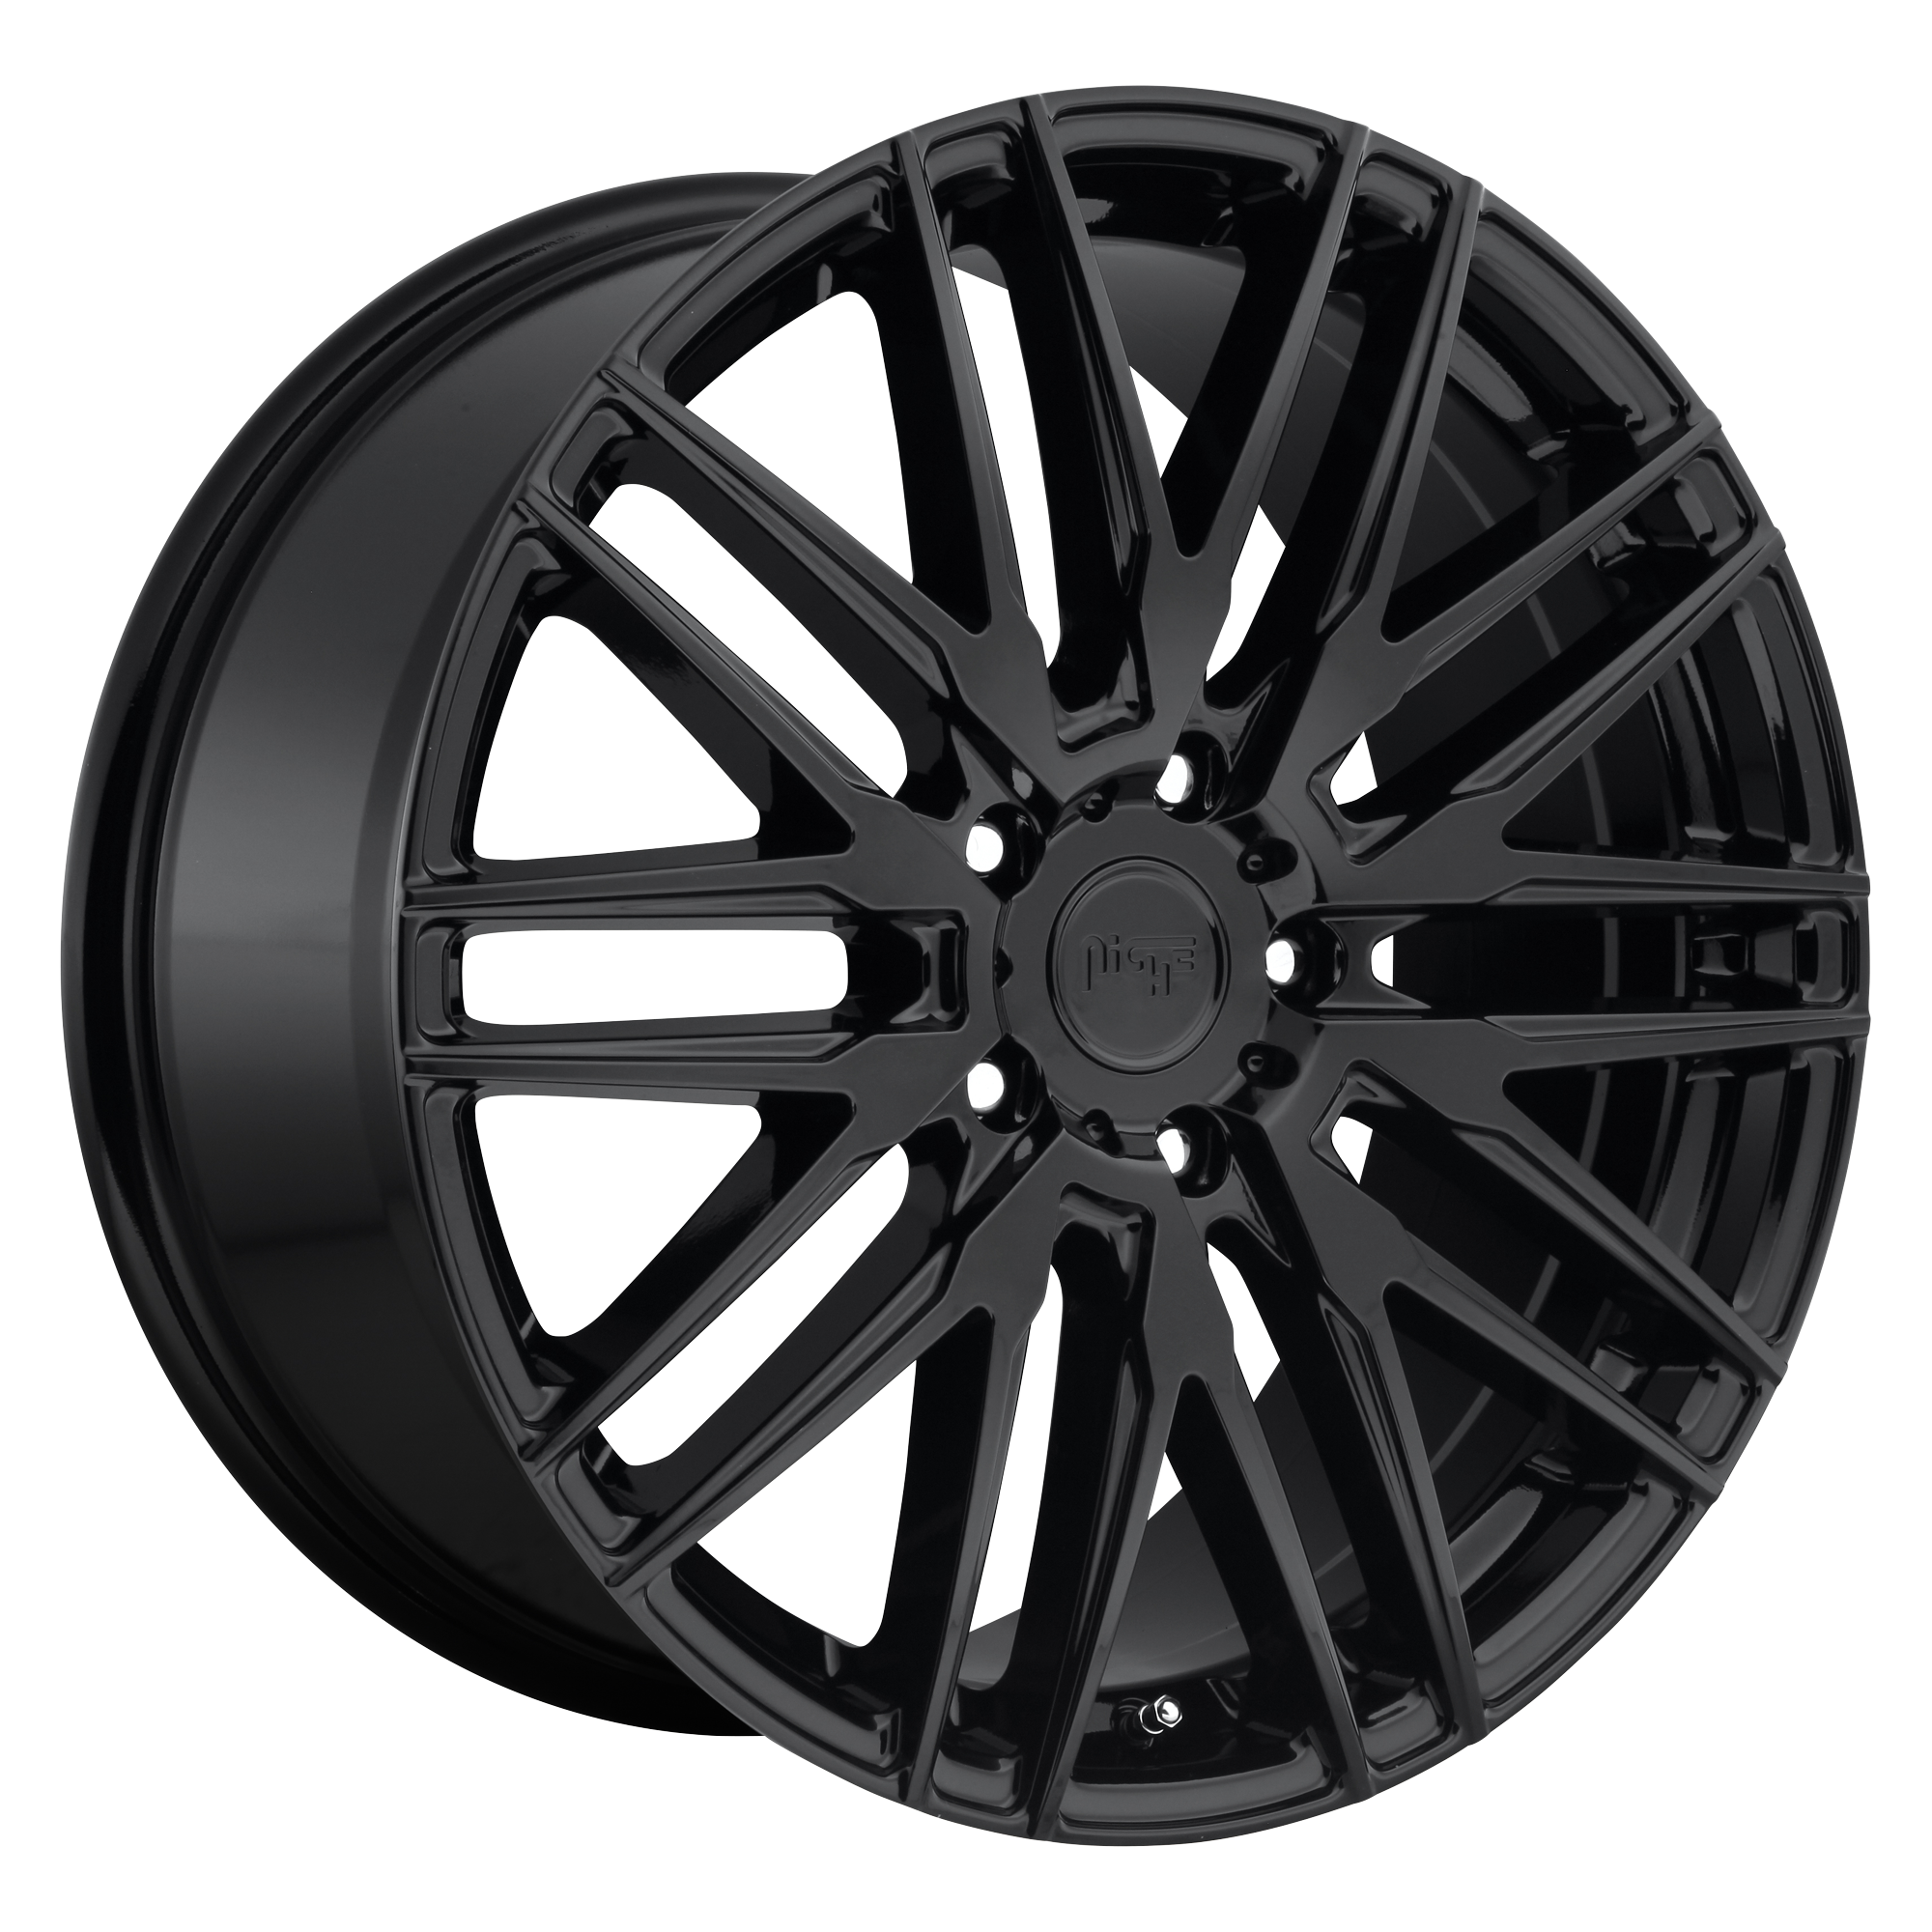 ANZIO 20x9 5x114.30 GLOSS BLACK (35 mm) - Tires and Engine Performance